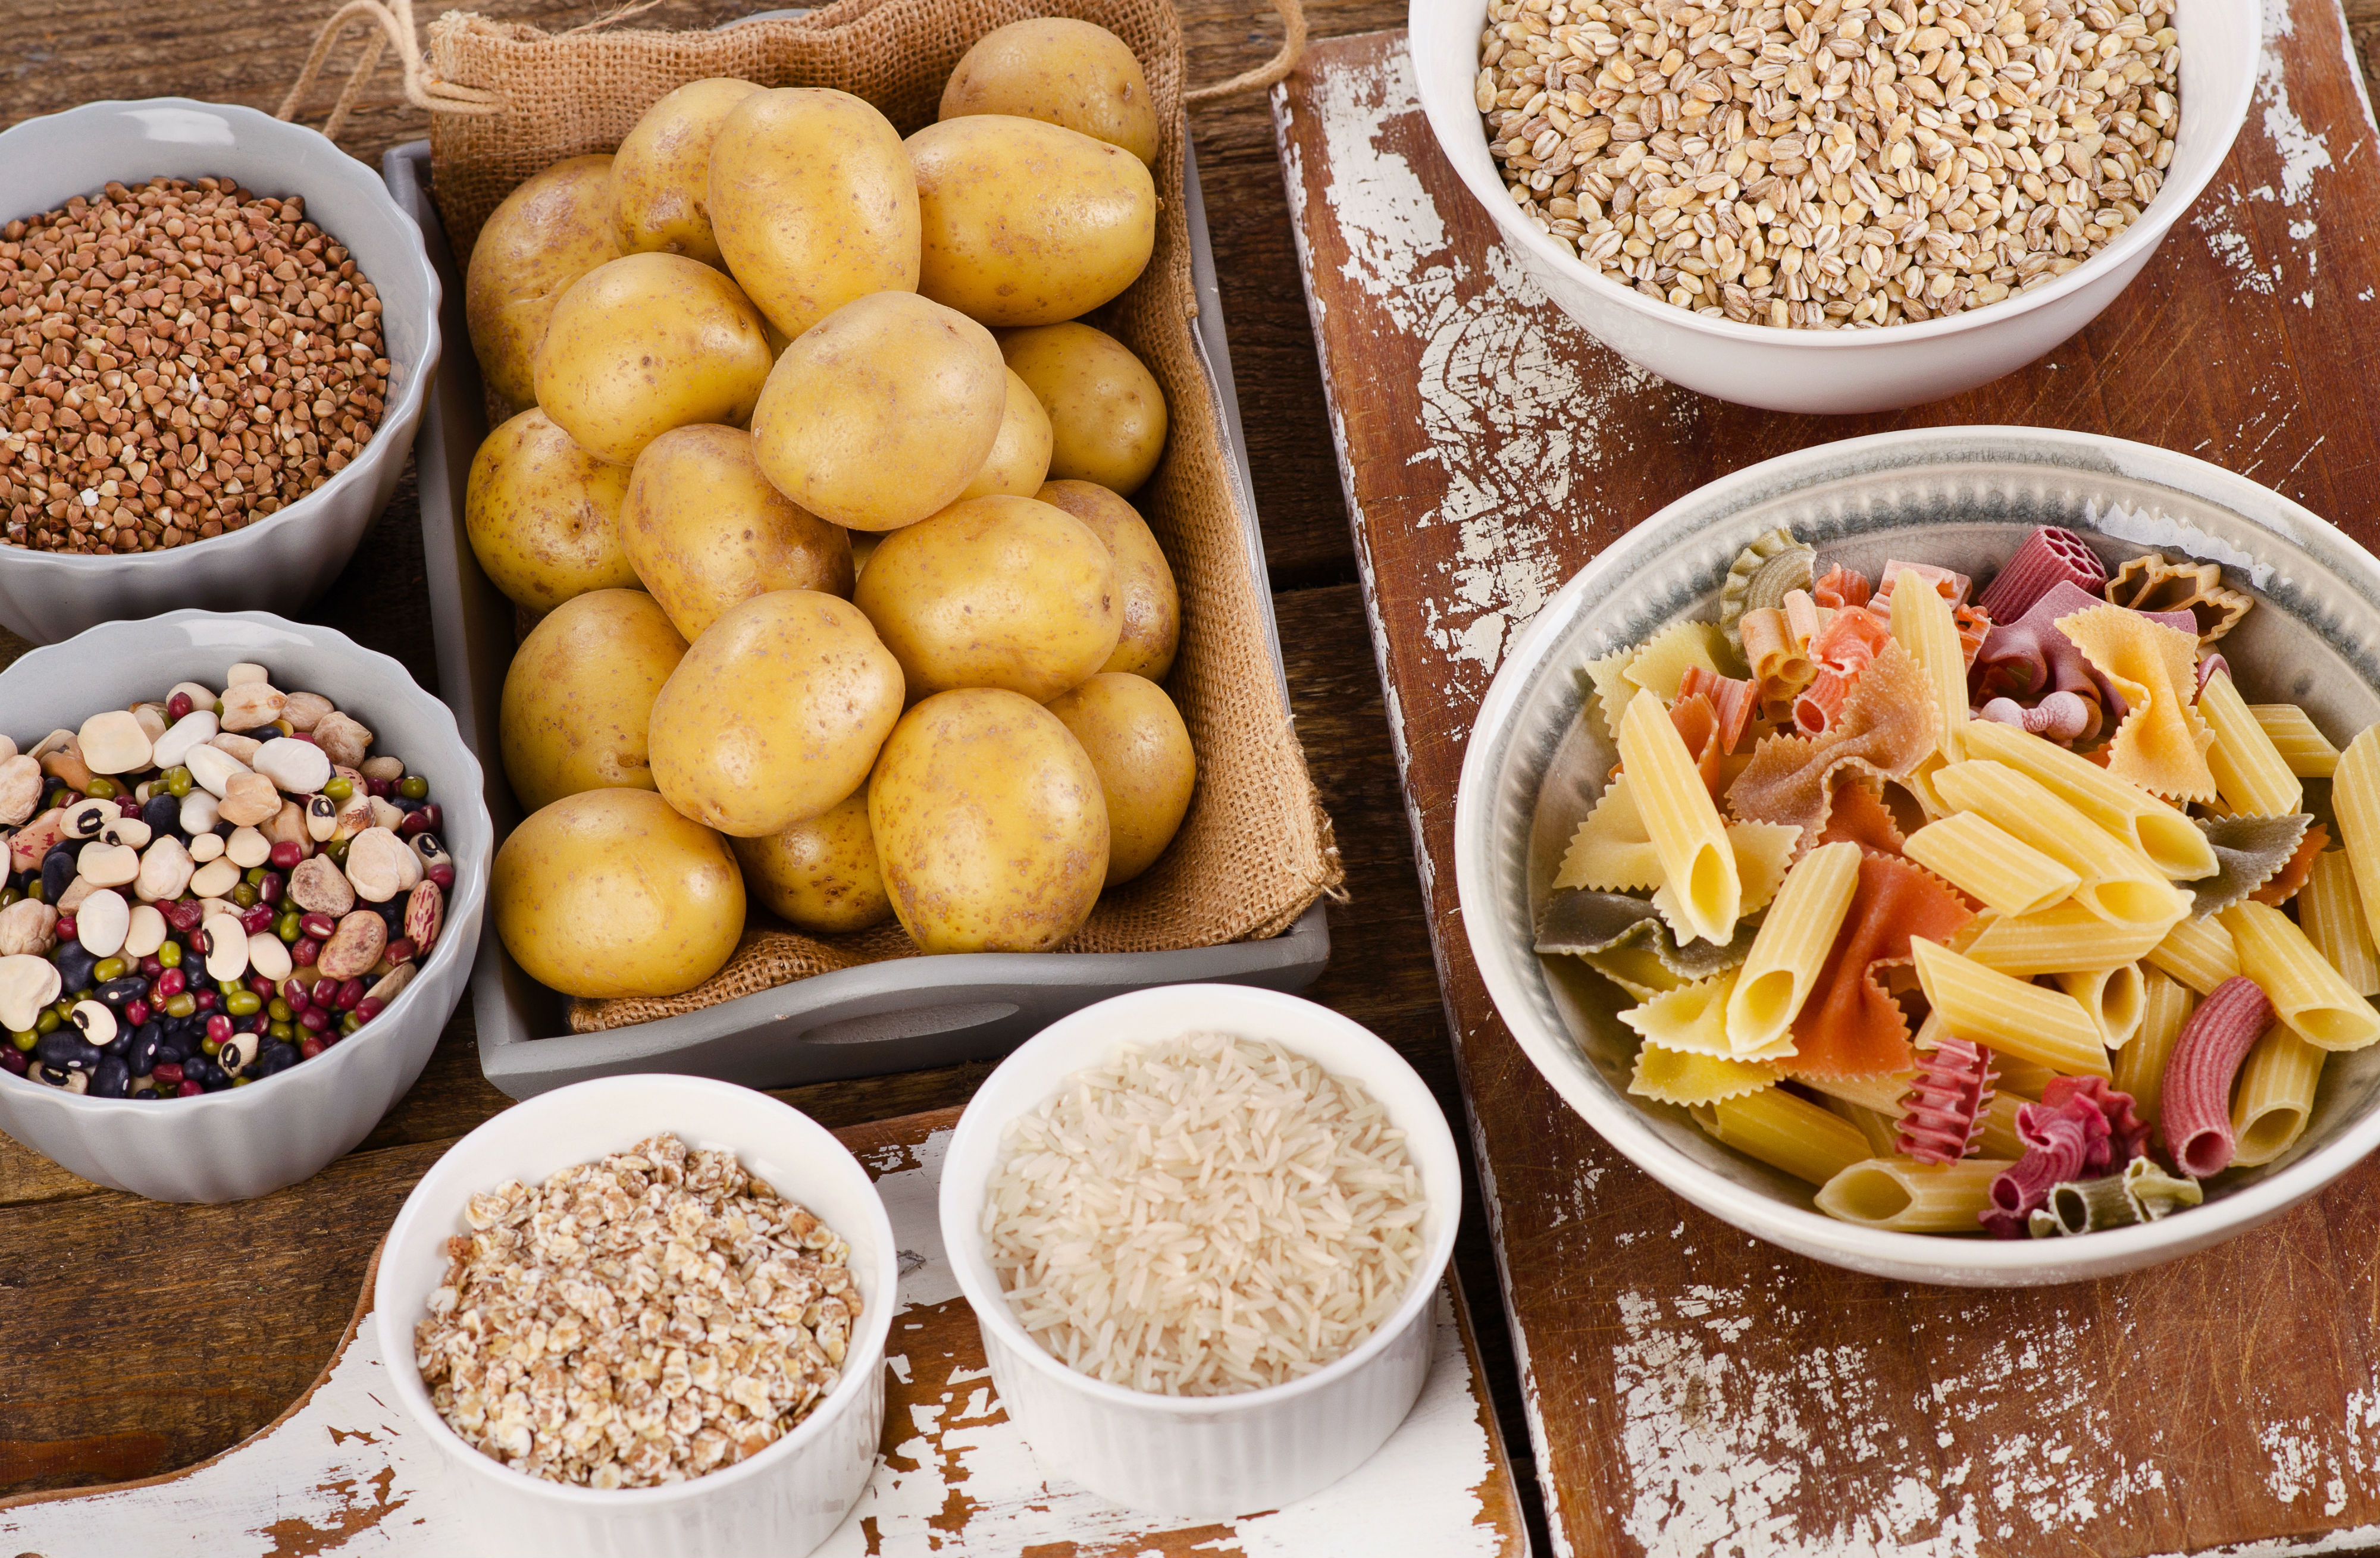 Are the Carbs the Bane of Your Fitness Diet? We Reveal the Truth About Them